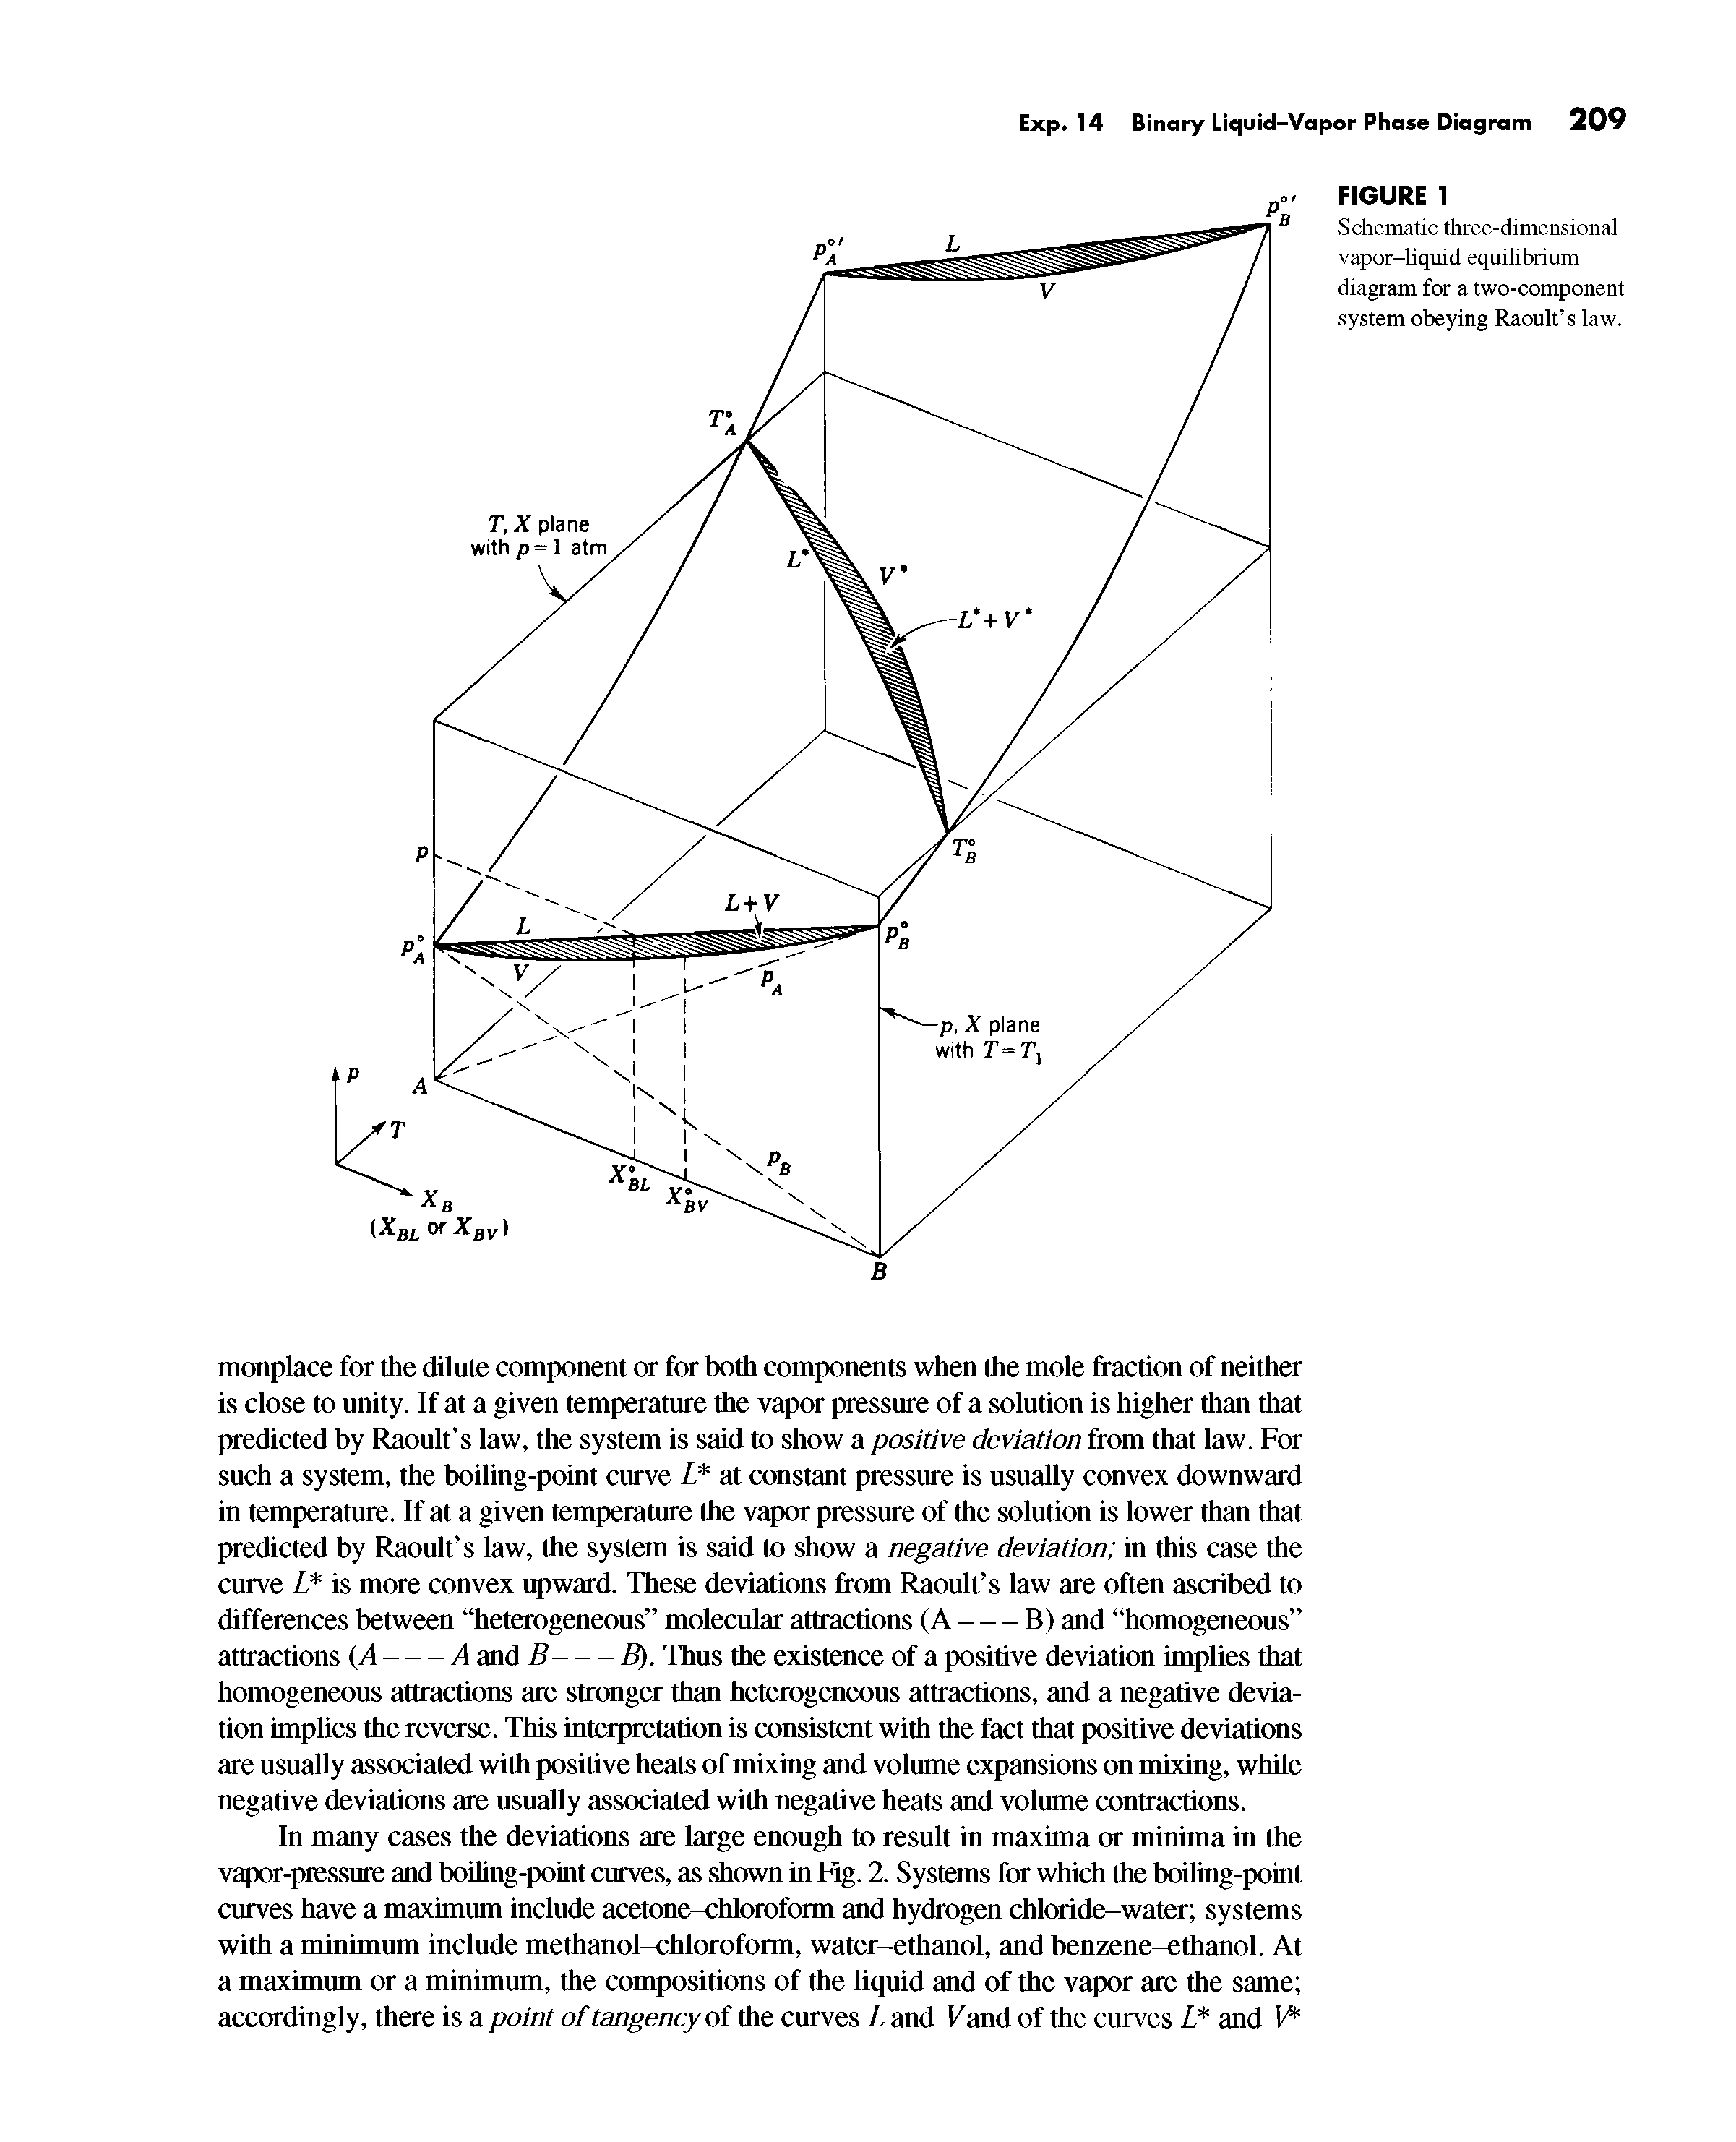 Schematic three-dimensional vapor-liquid equilibrium diagram for a two-component system obeying Raoult s law.